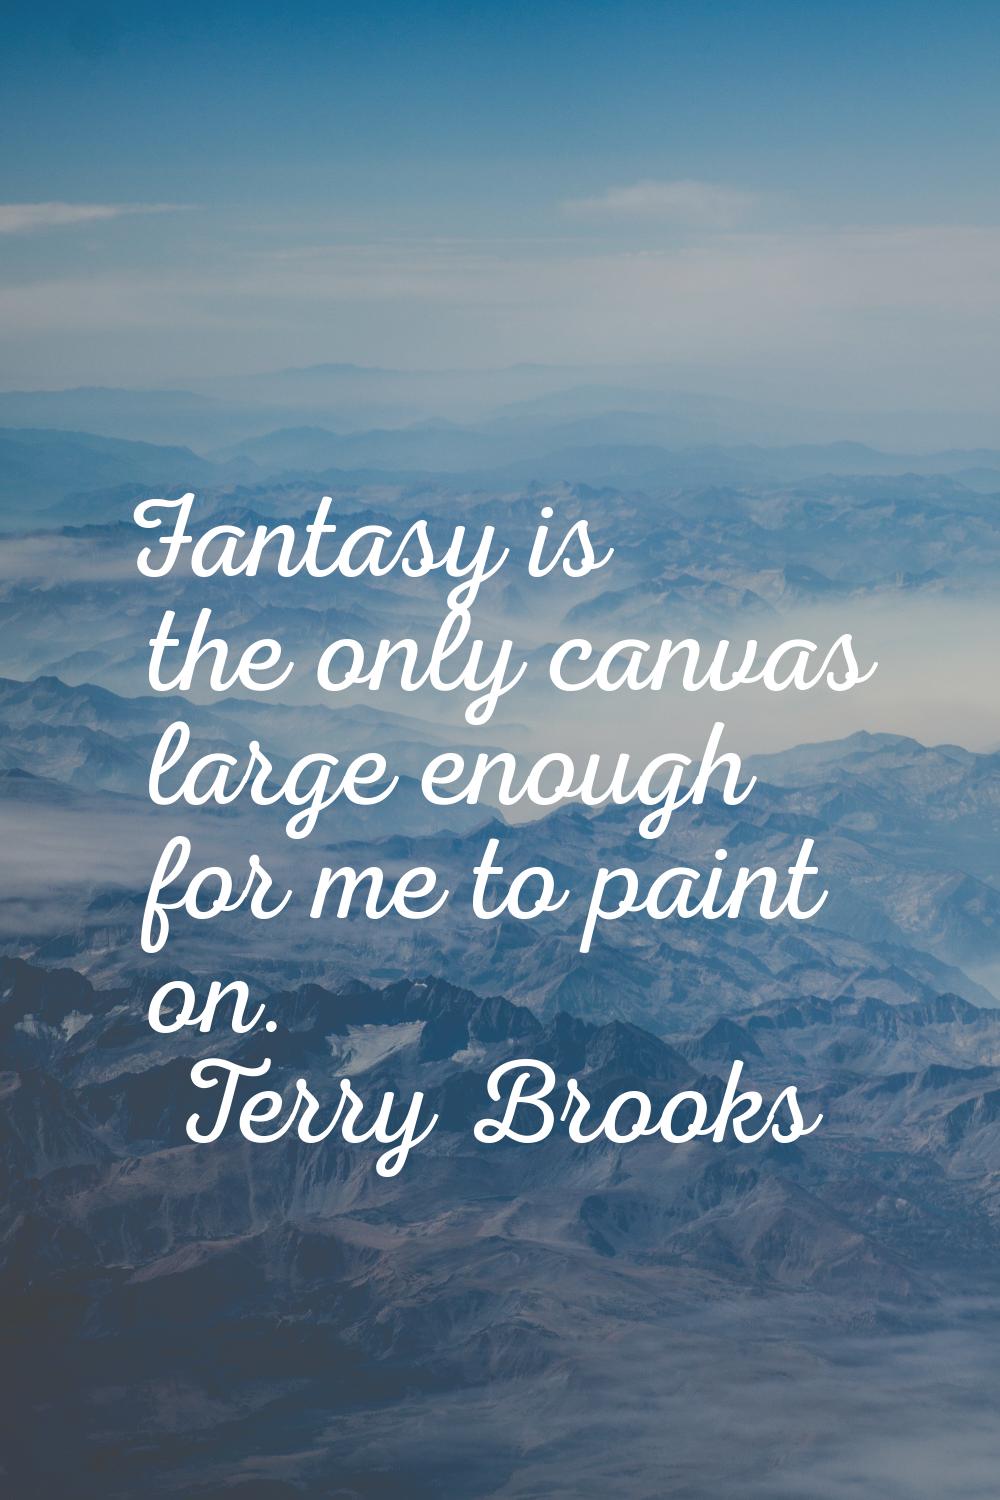 Fantasy is the only canvas large enough for me to paint on.